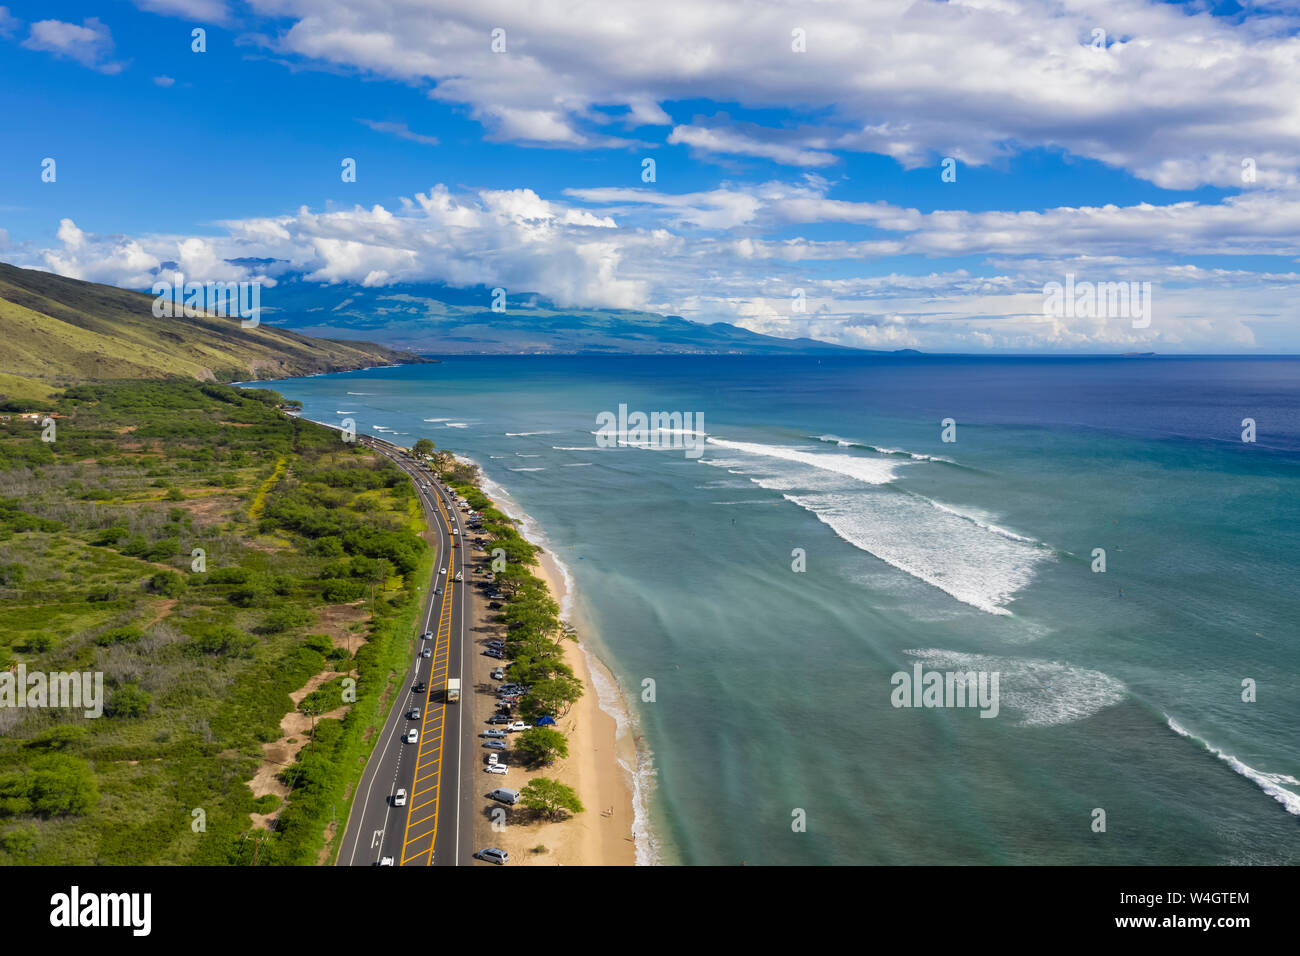 Aerial view over West Maui Mountains, Pacific Ocean and the coast along the Hawaii Route 30, Maui, Hawaii, USA Stock Photo